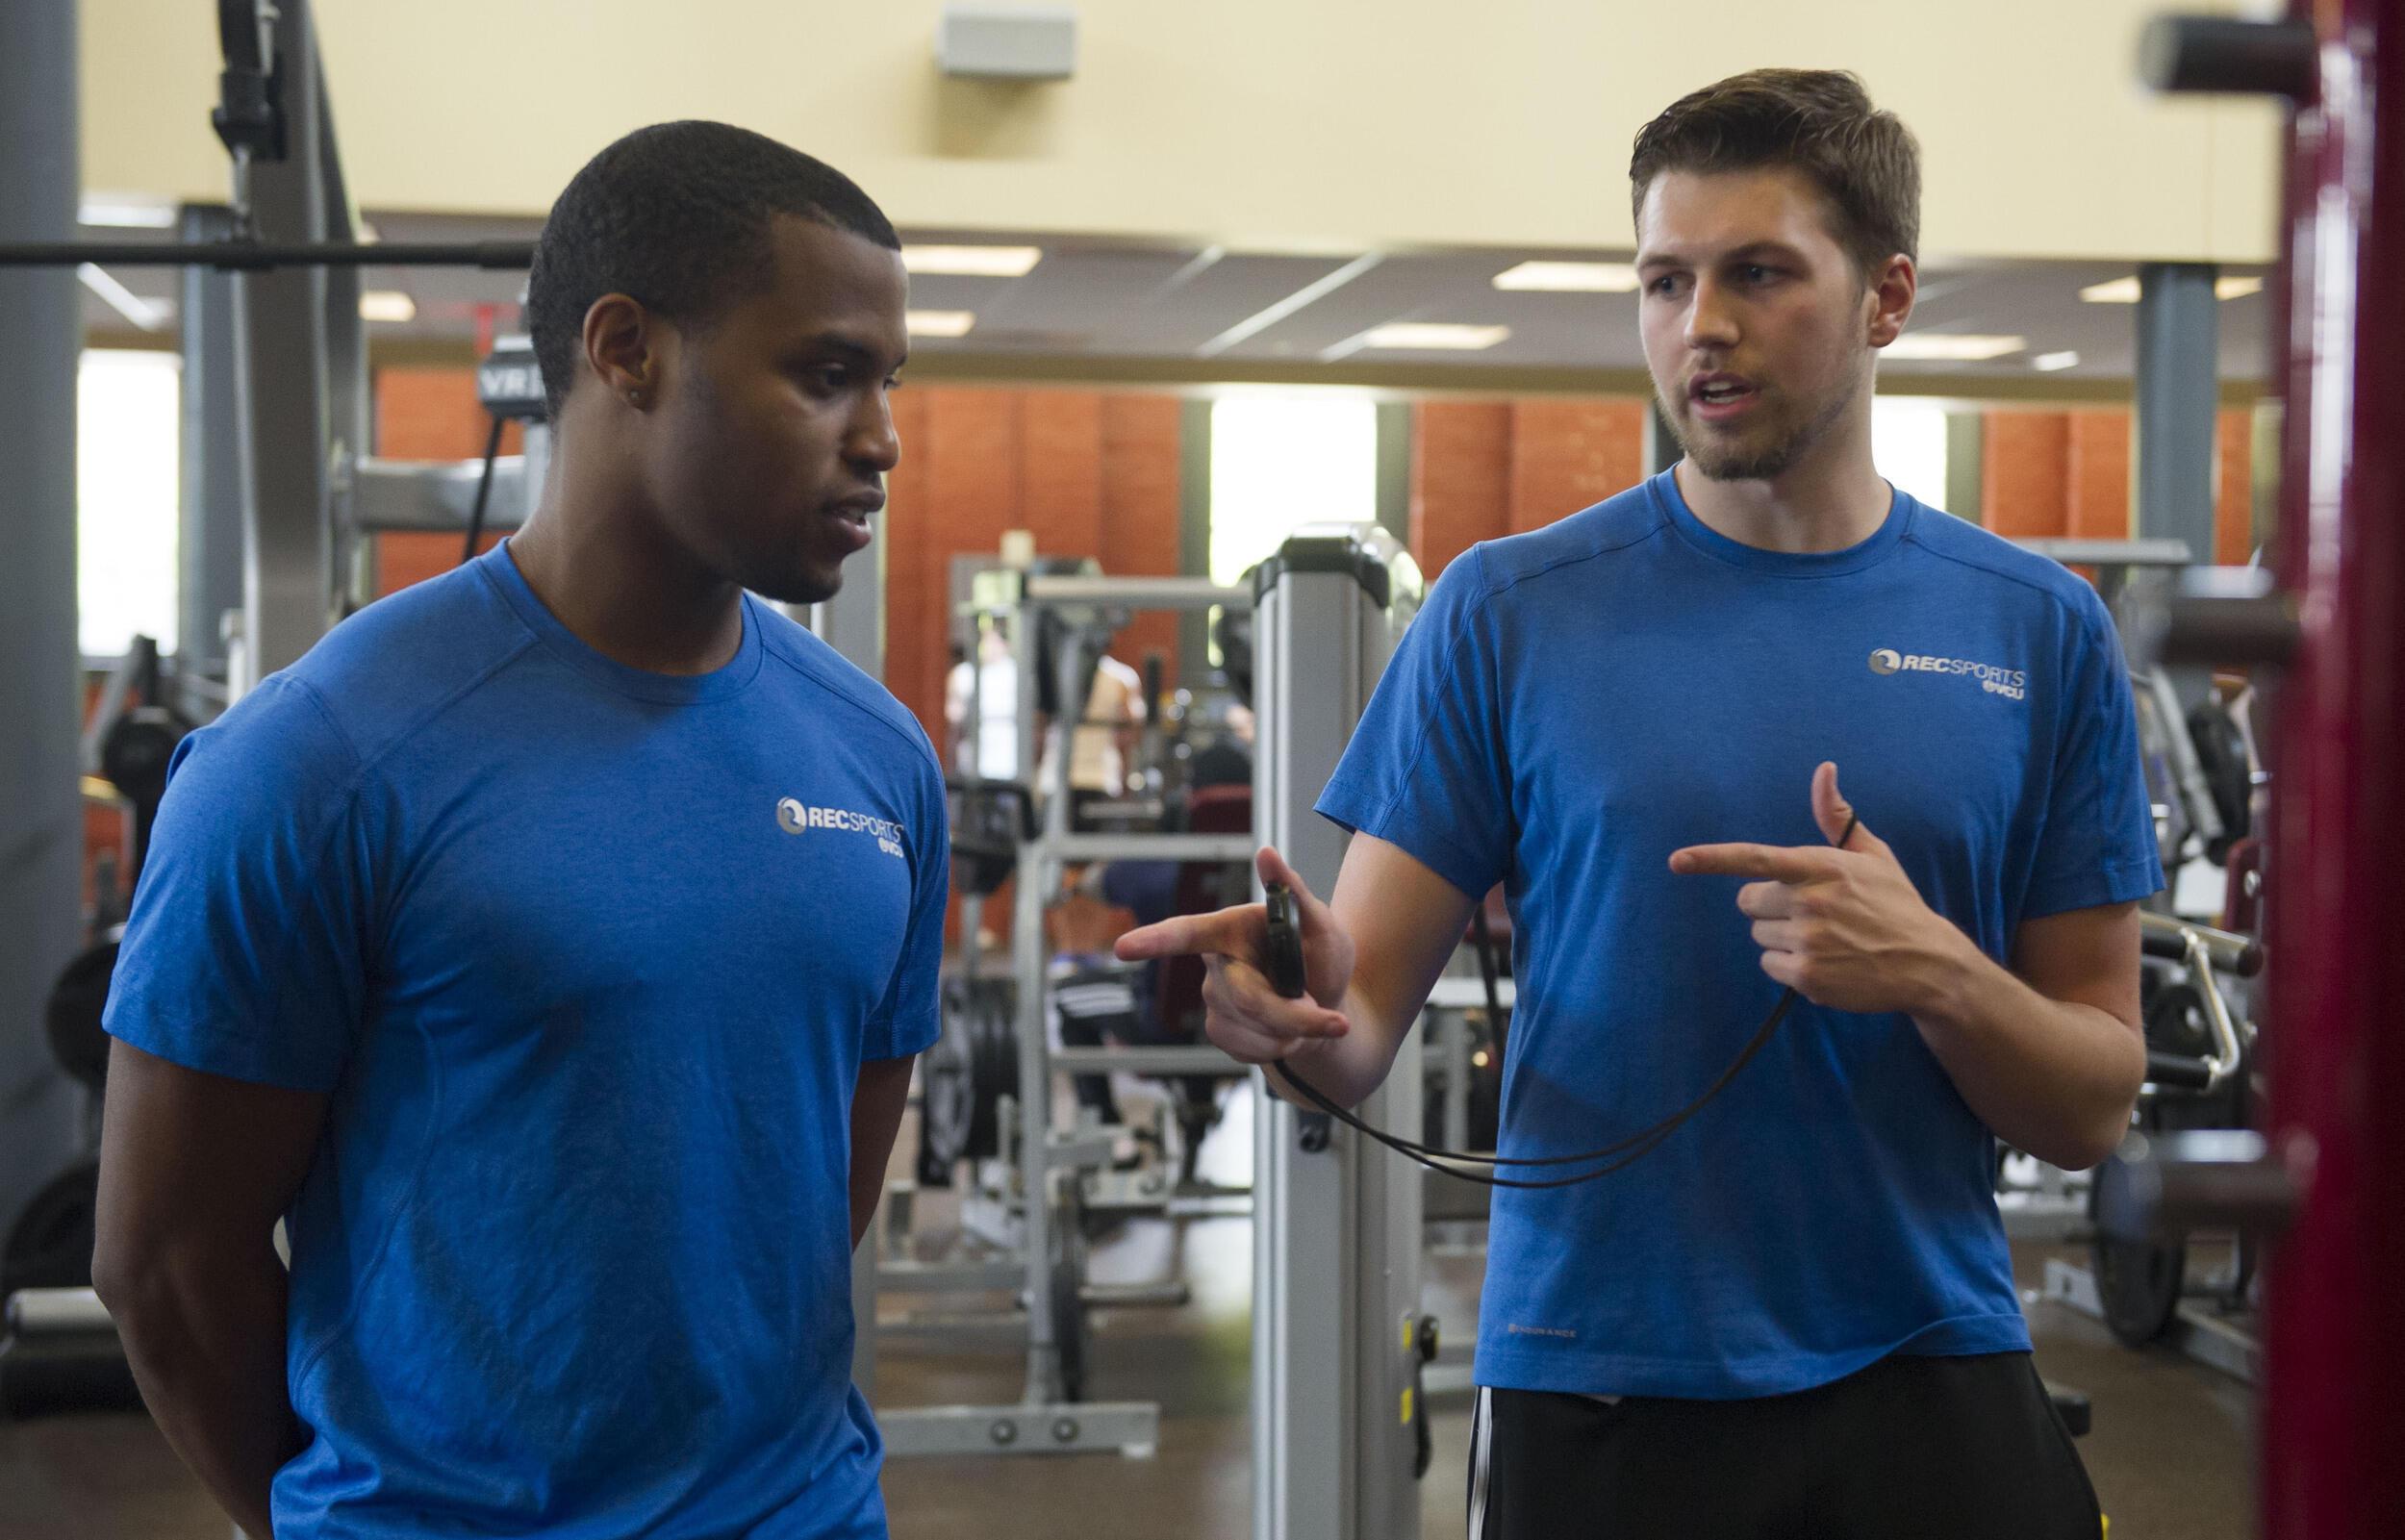 Quincy Carter, left, and Imthurn are exercise science majors in the Department of Kinesiology and Health Sciences in the College of Humanities and Sciences. (Julia Rendleman, University Marketing)